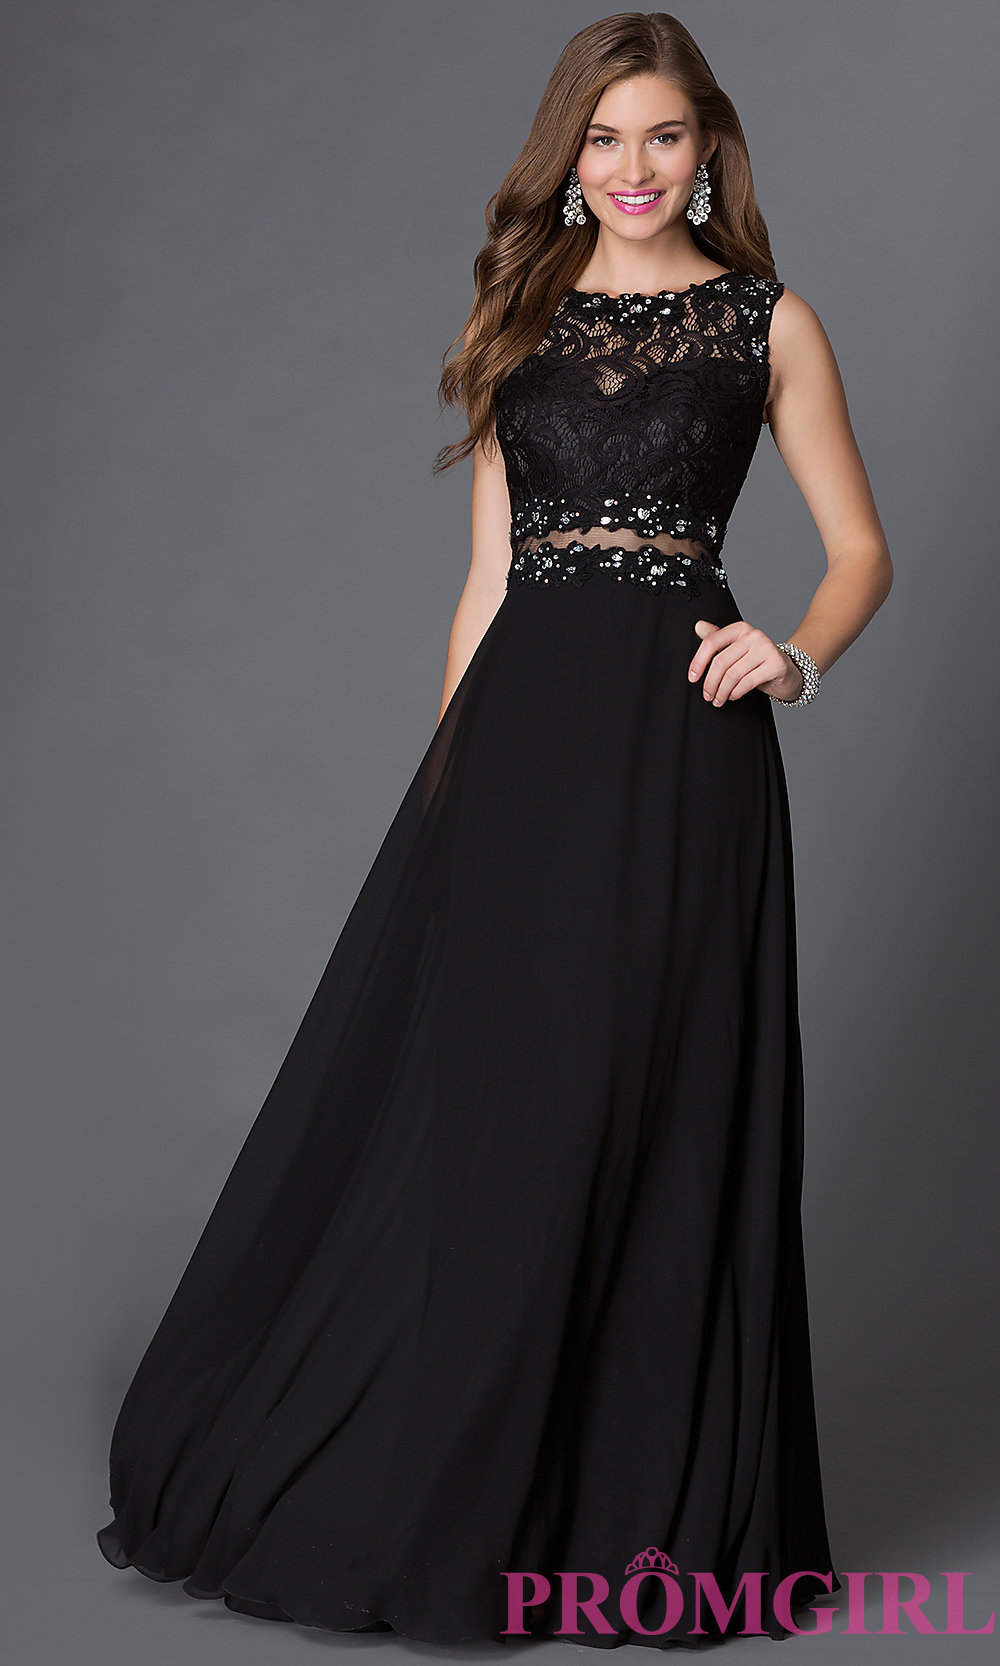 Gowns In Black And Perfect Choices